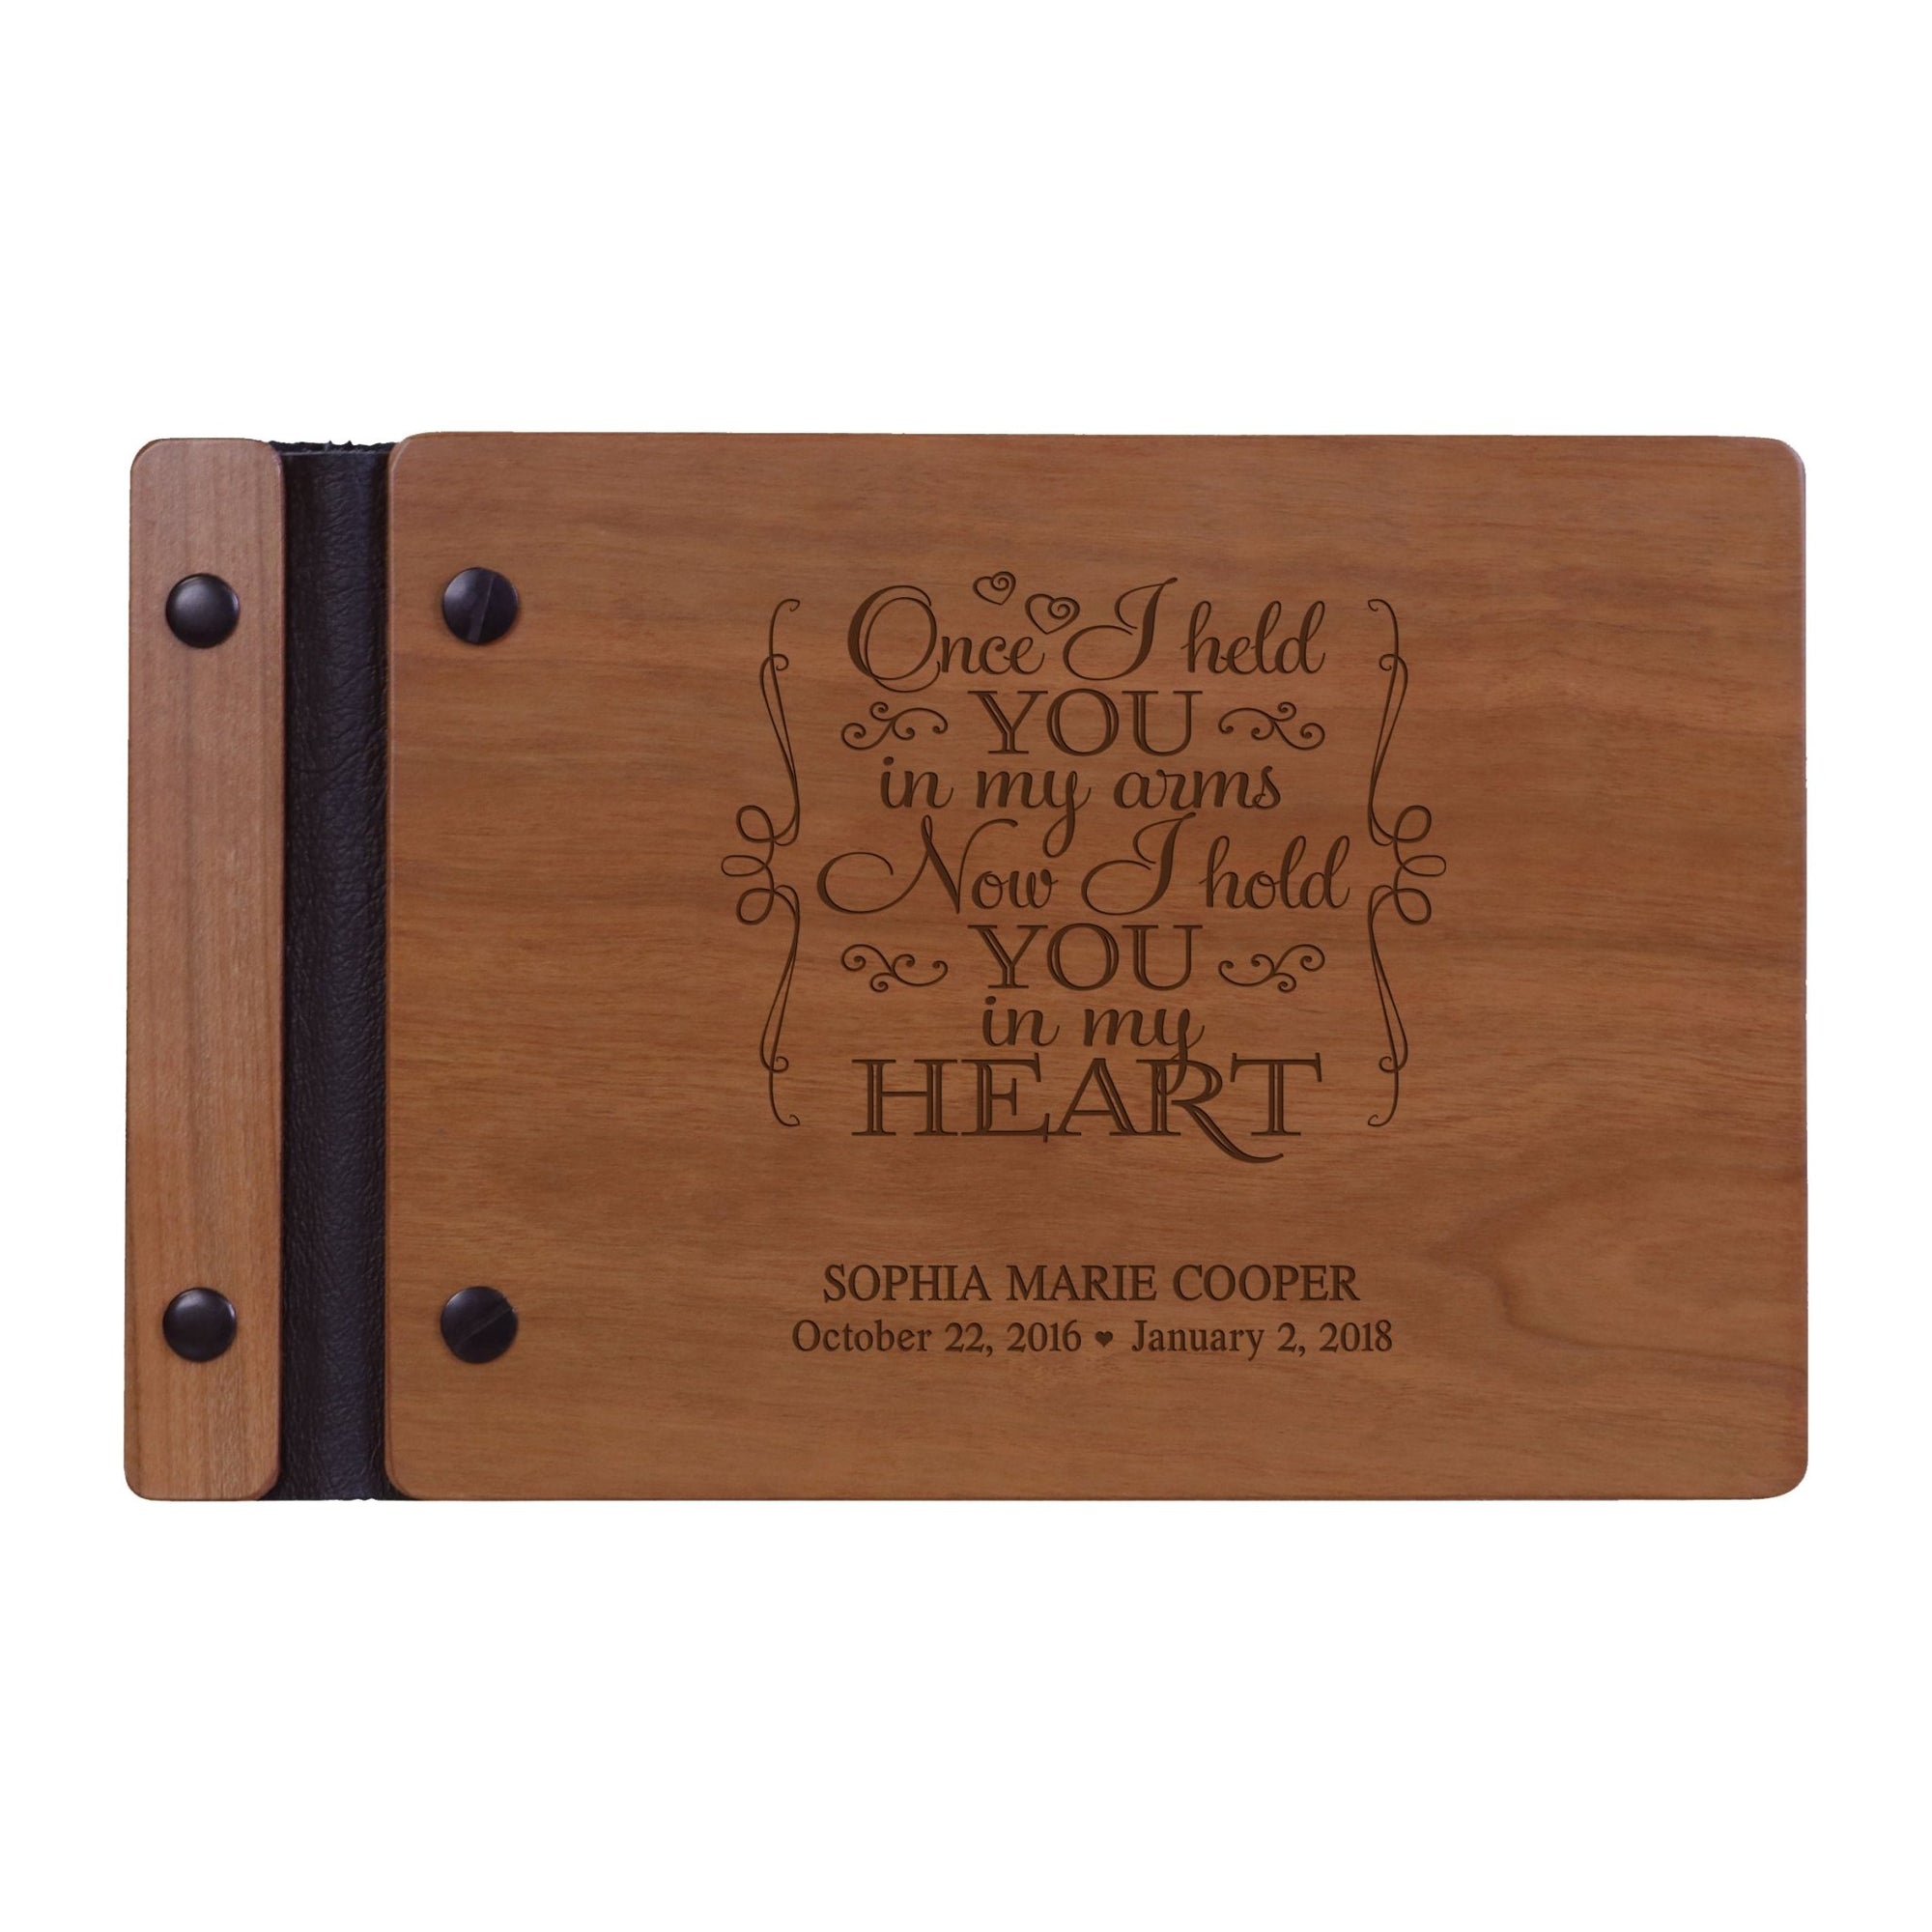 Personalized Memorial Guest Book - I Held You - LifeSong Milestones